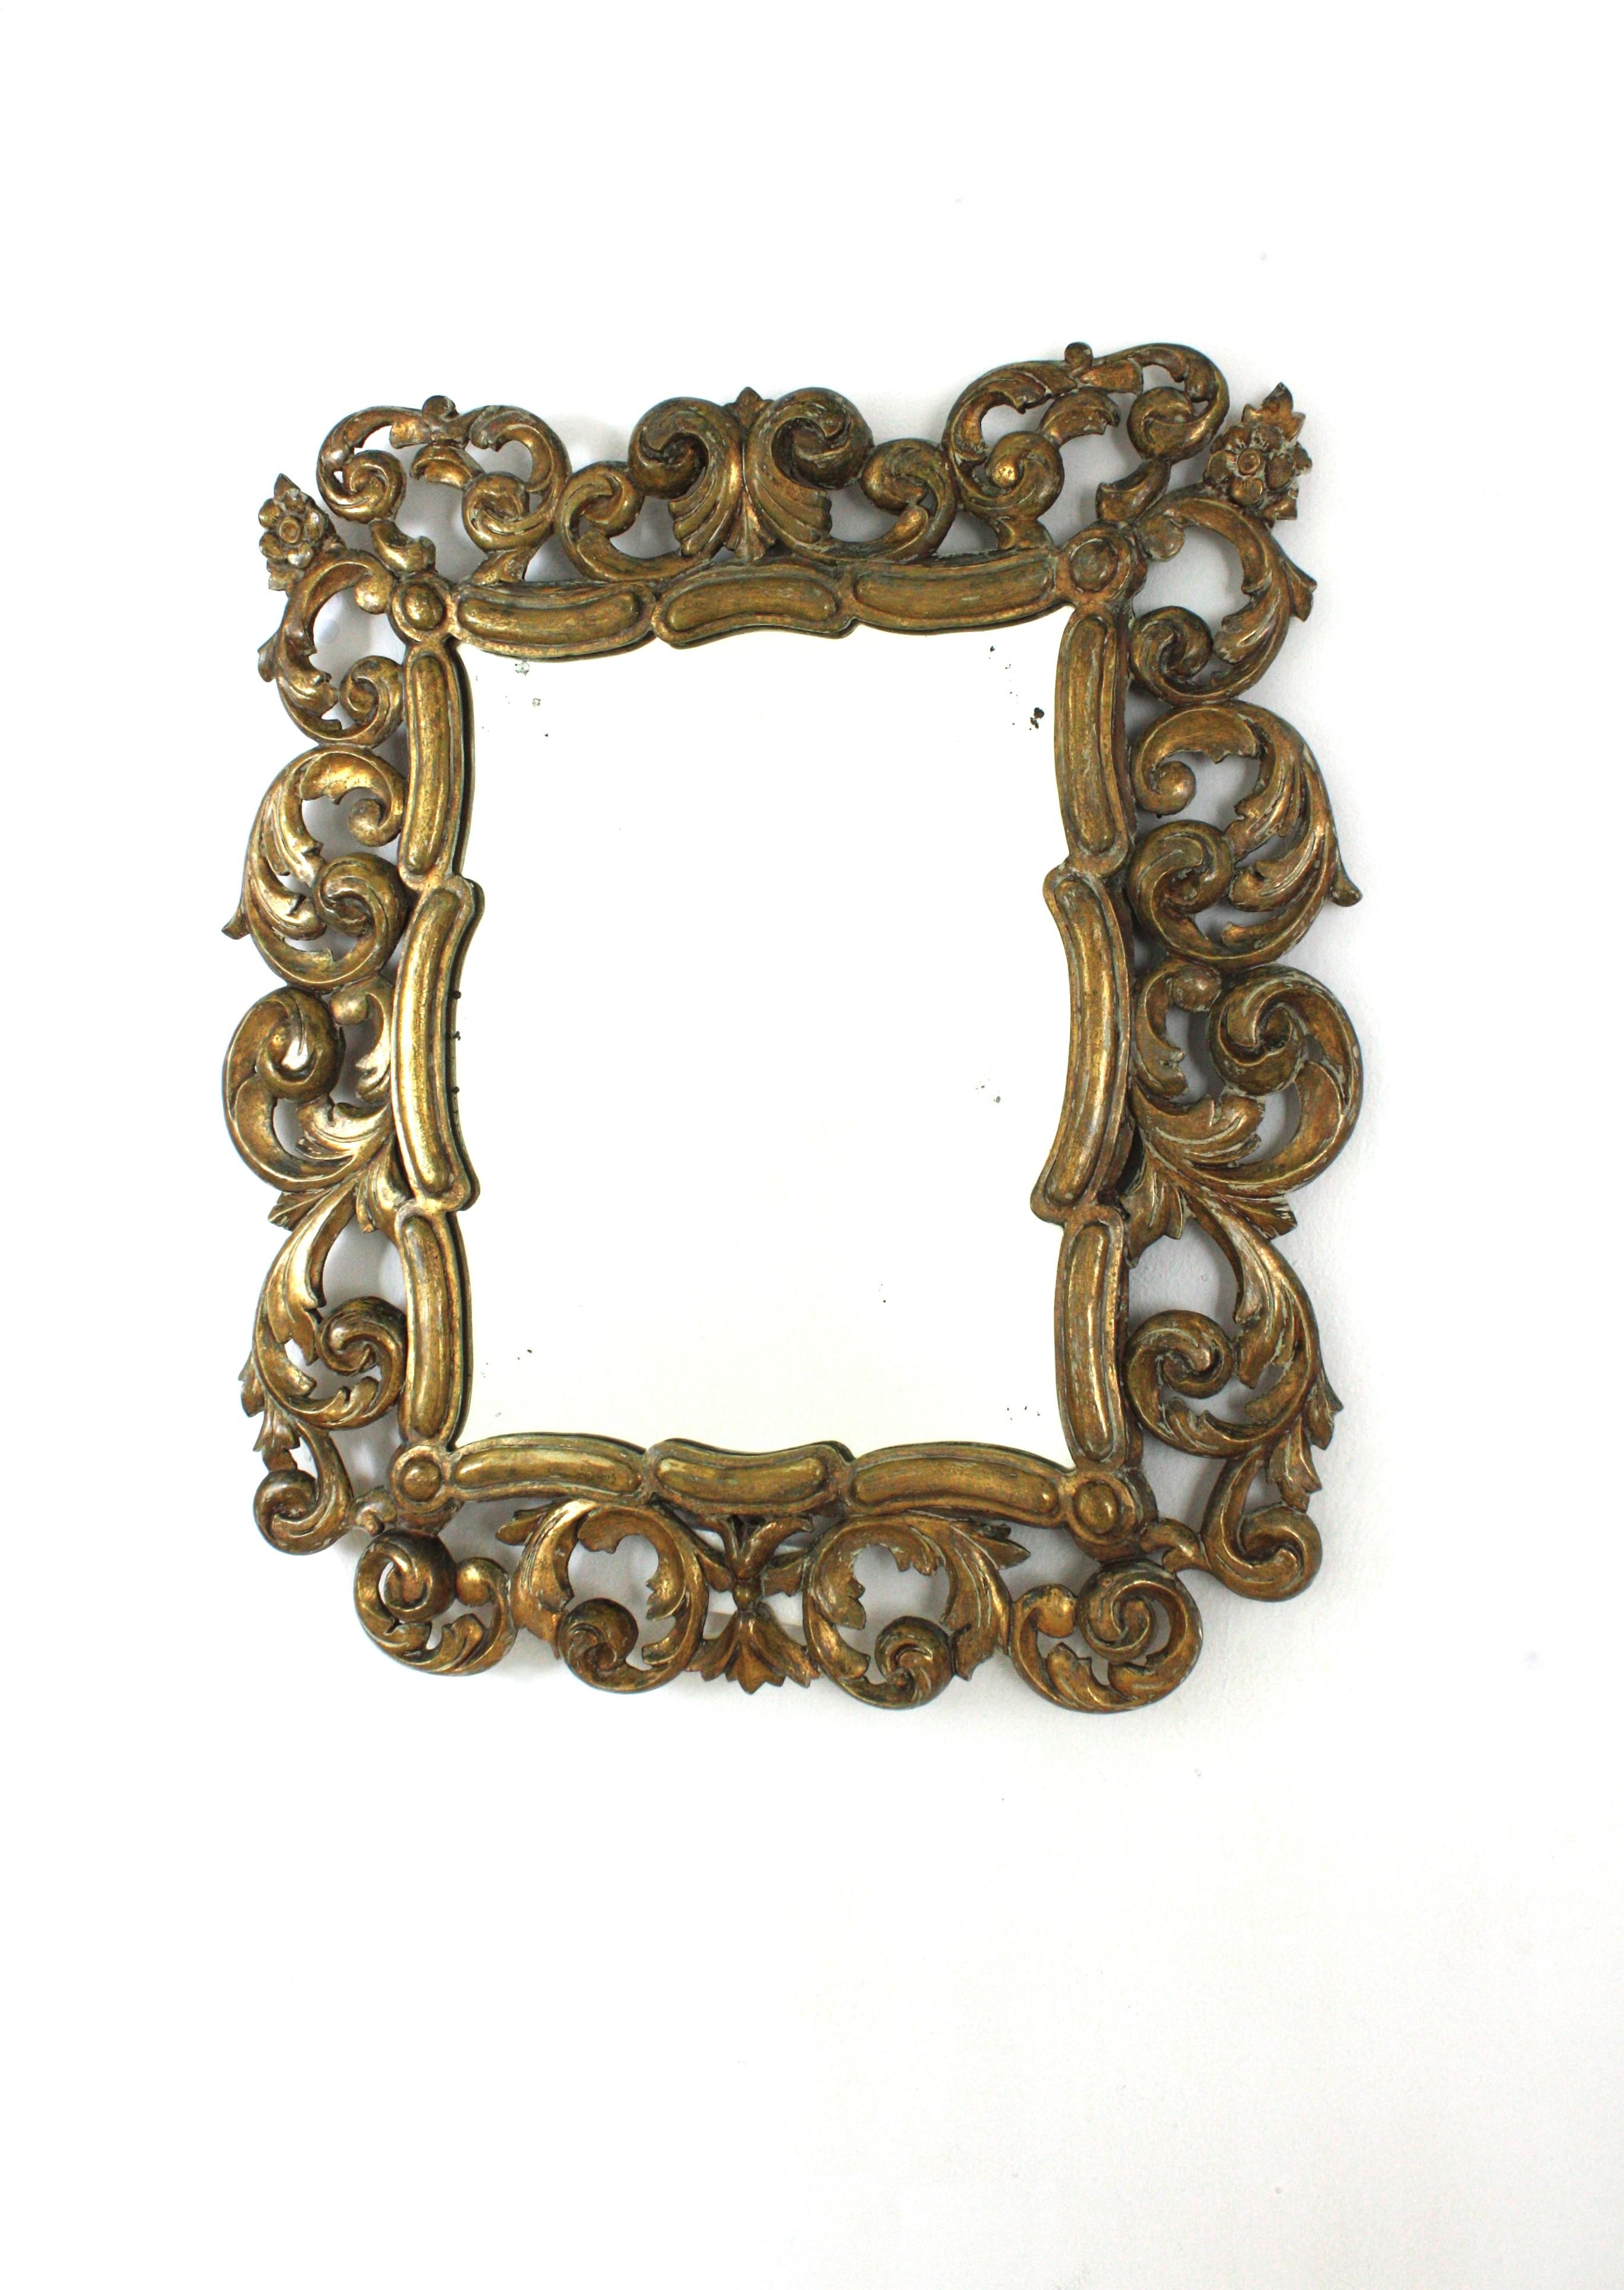 Spanish Foliage Gilt Carved Wood Mirror with Scroll Work Design For Sale 2